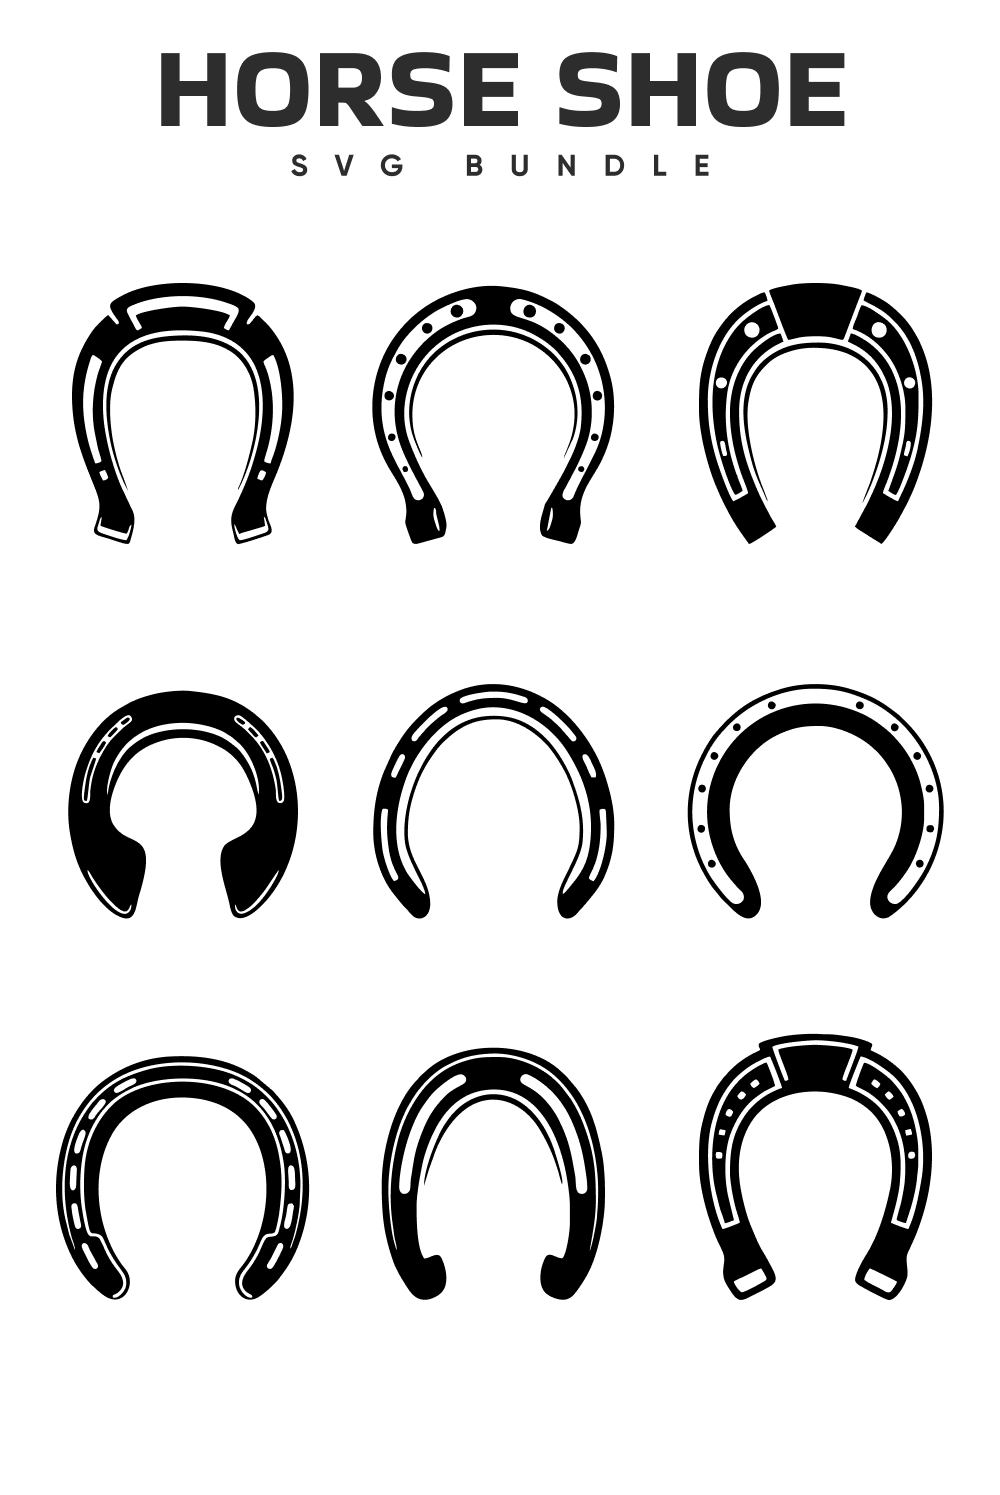 Set of horseshoes with different shapes and sizes.